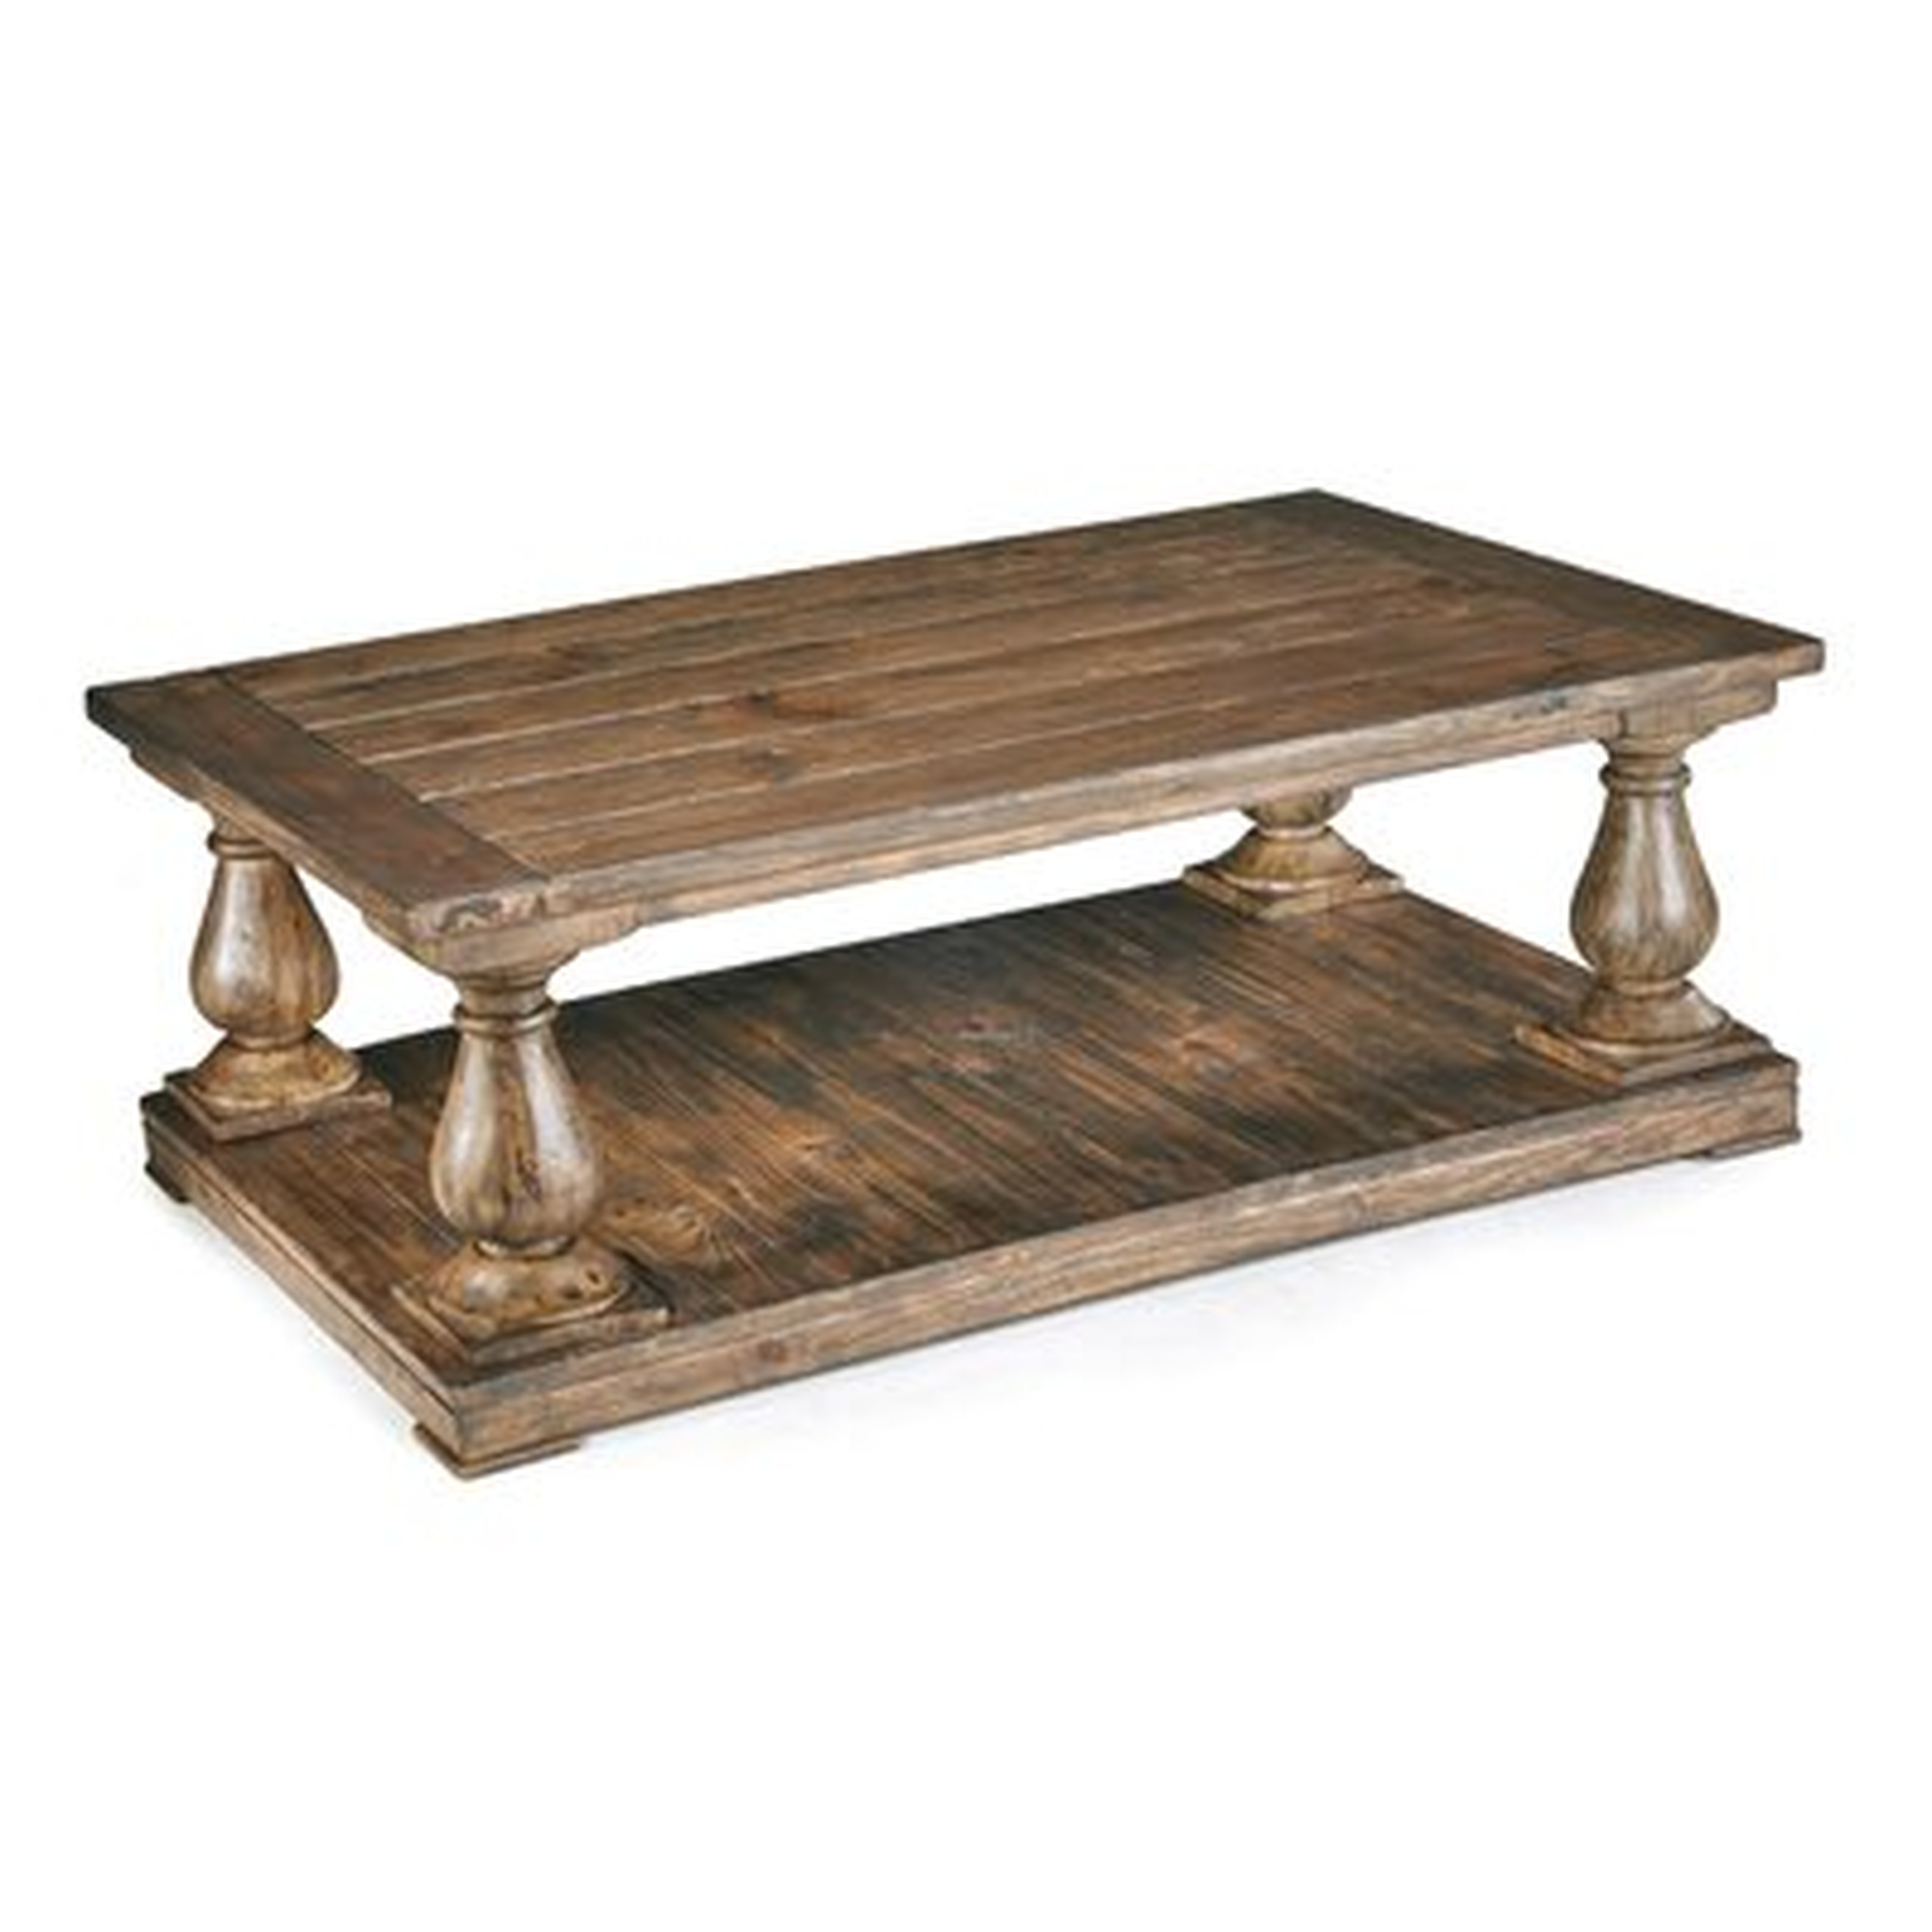 Finlayson Solid Wood Solid Coffee Table with Storage - Birch Lane